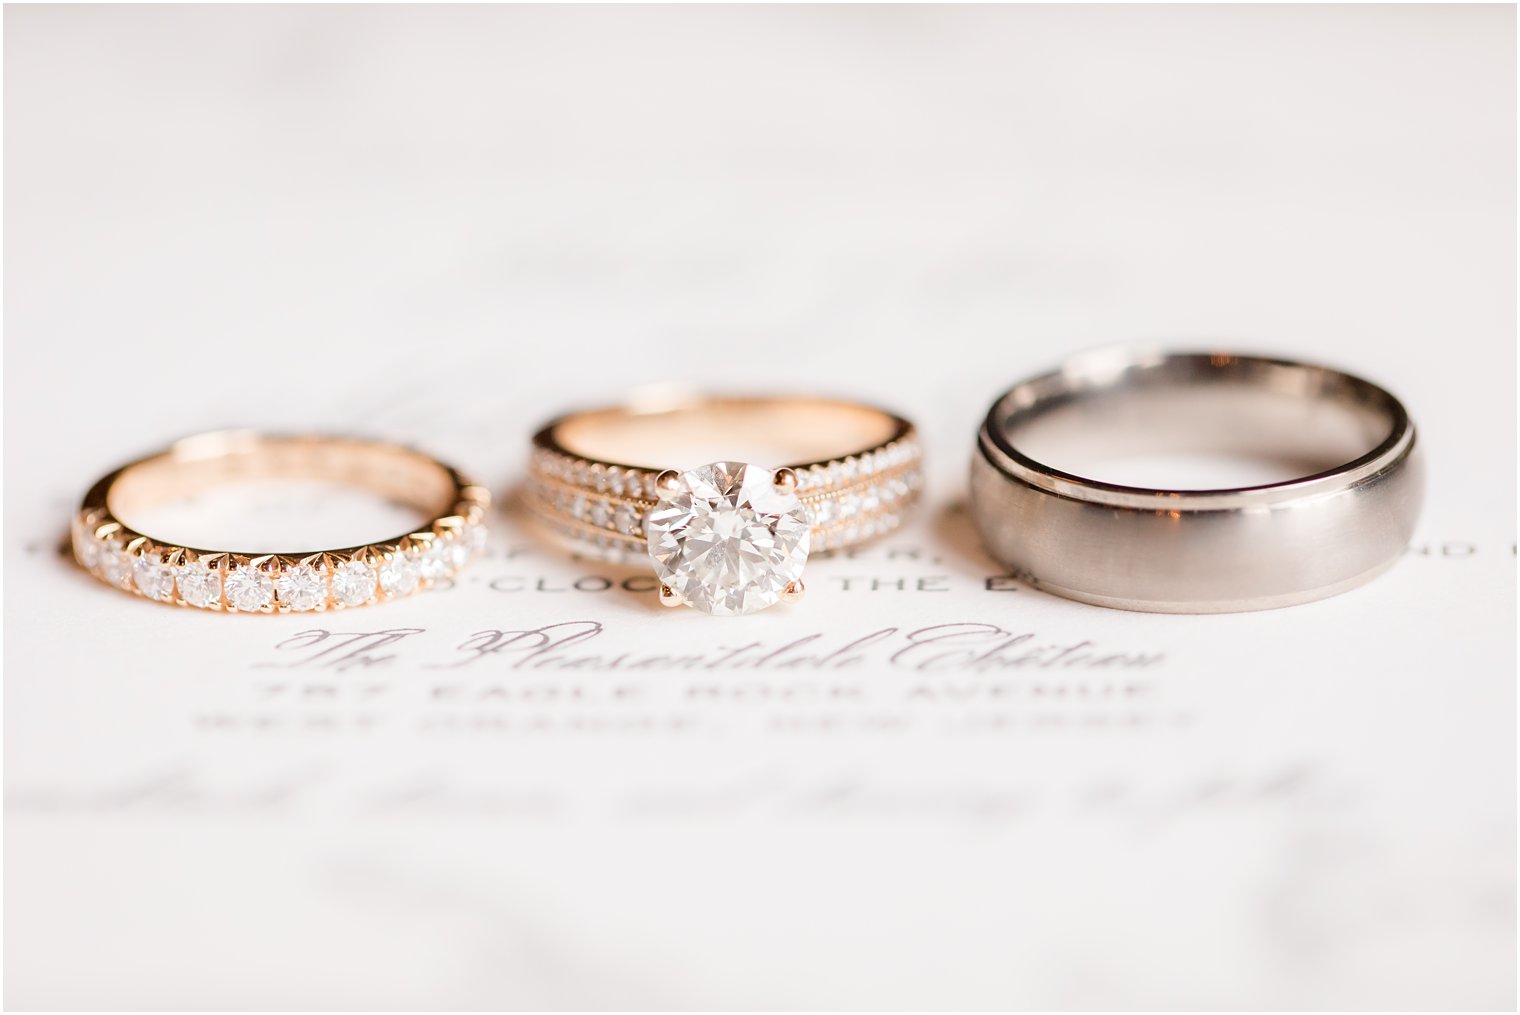 Wedding bands for a timeless winter wedding at Pleasantdale Chateau